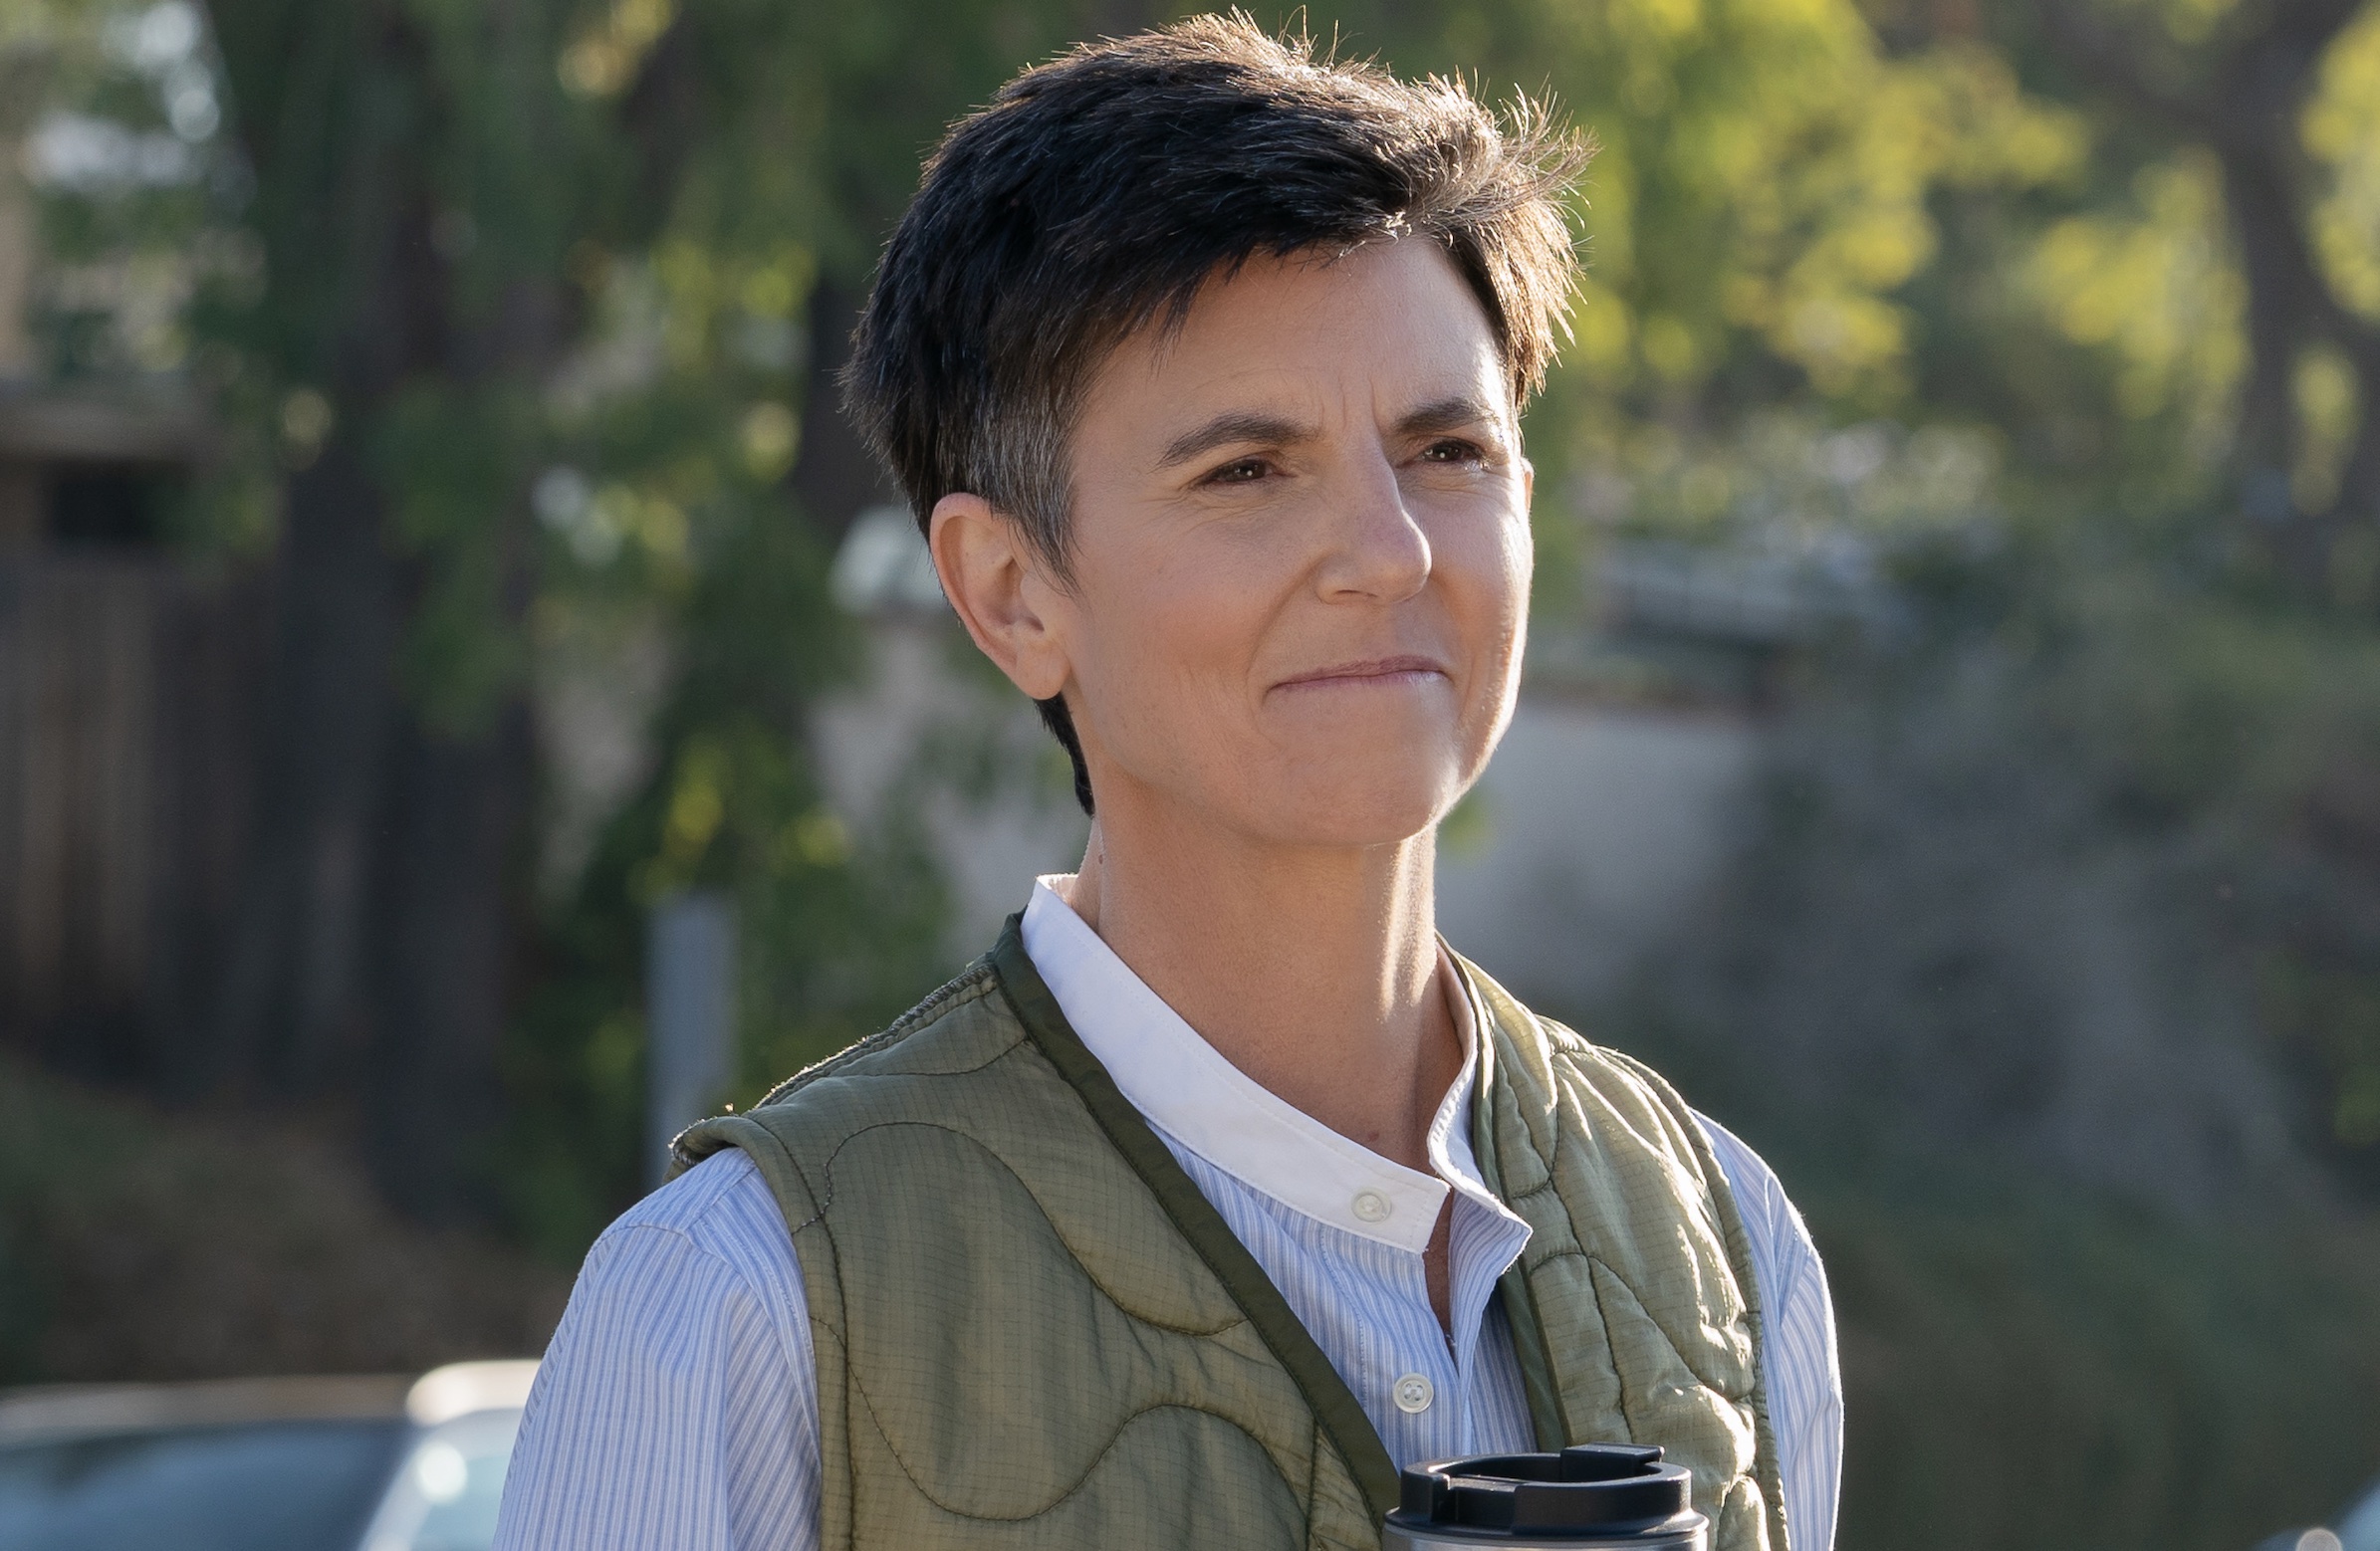 Your Place or Mine Cast on Netflix - Tig Notaro as Alicia